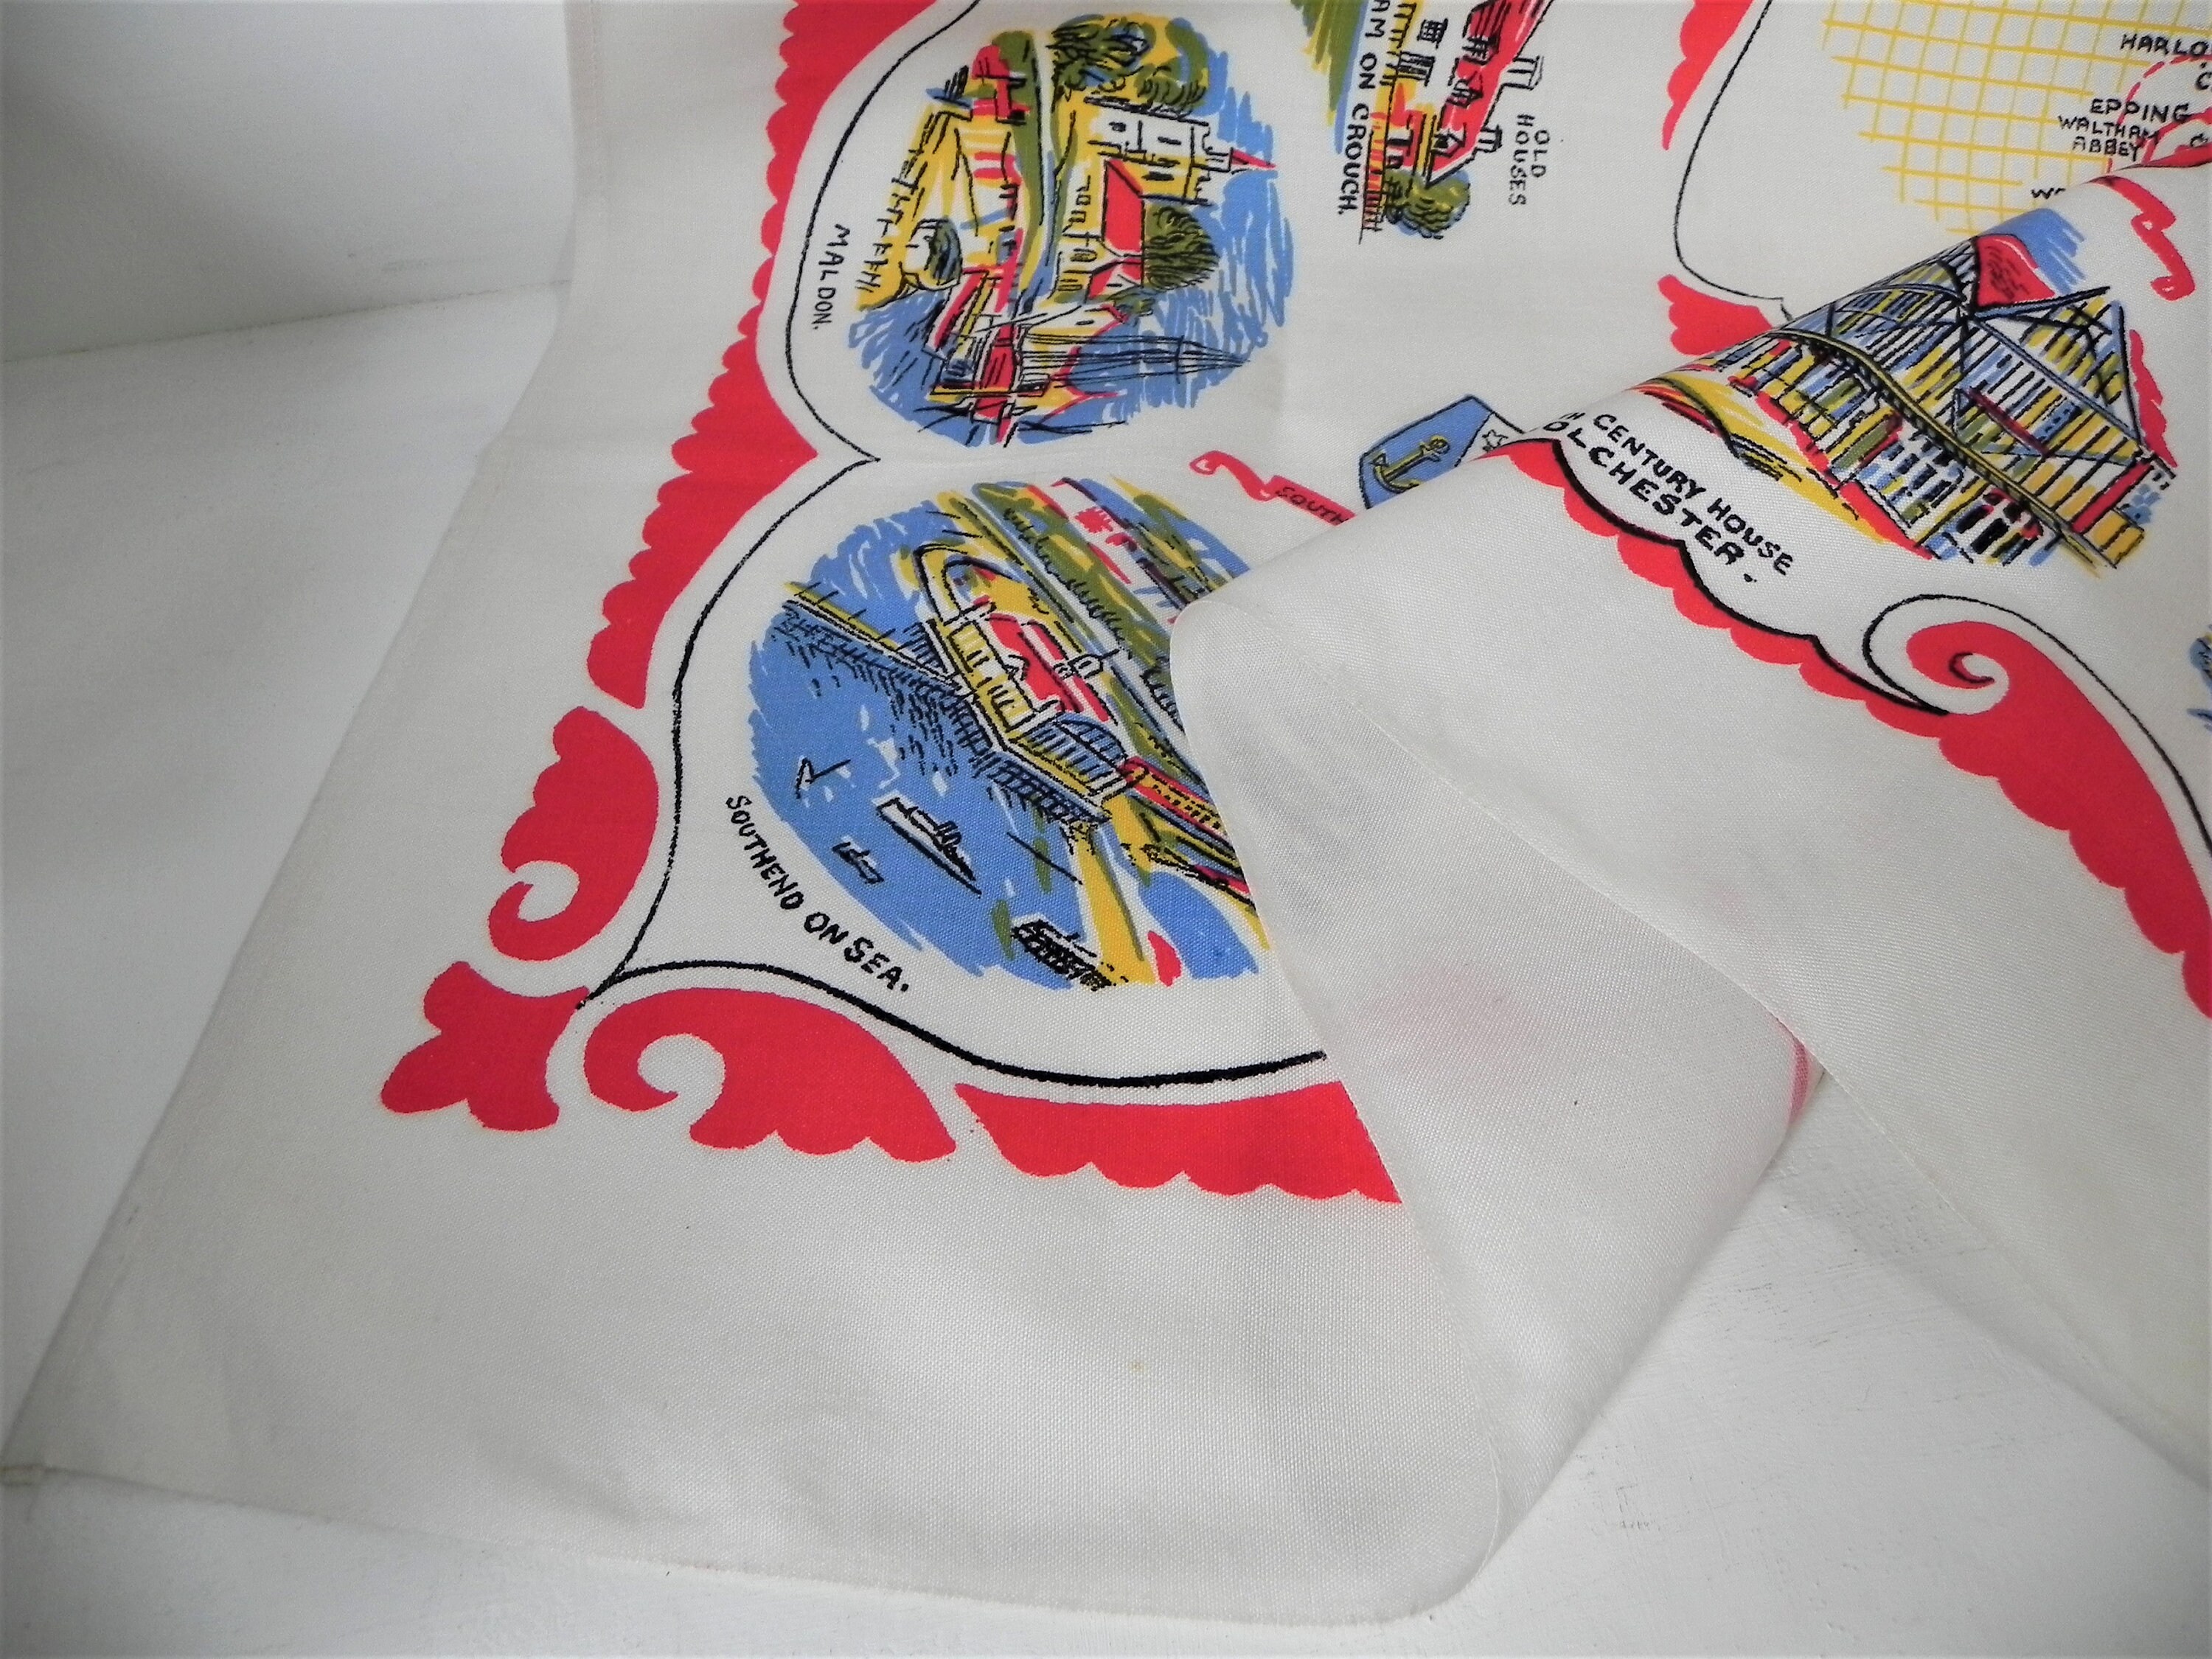 A Vintage Souvenir Table Cloth From East Anglia Showing Scenes From The East Coast Of England